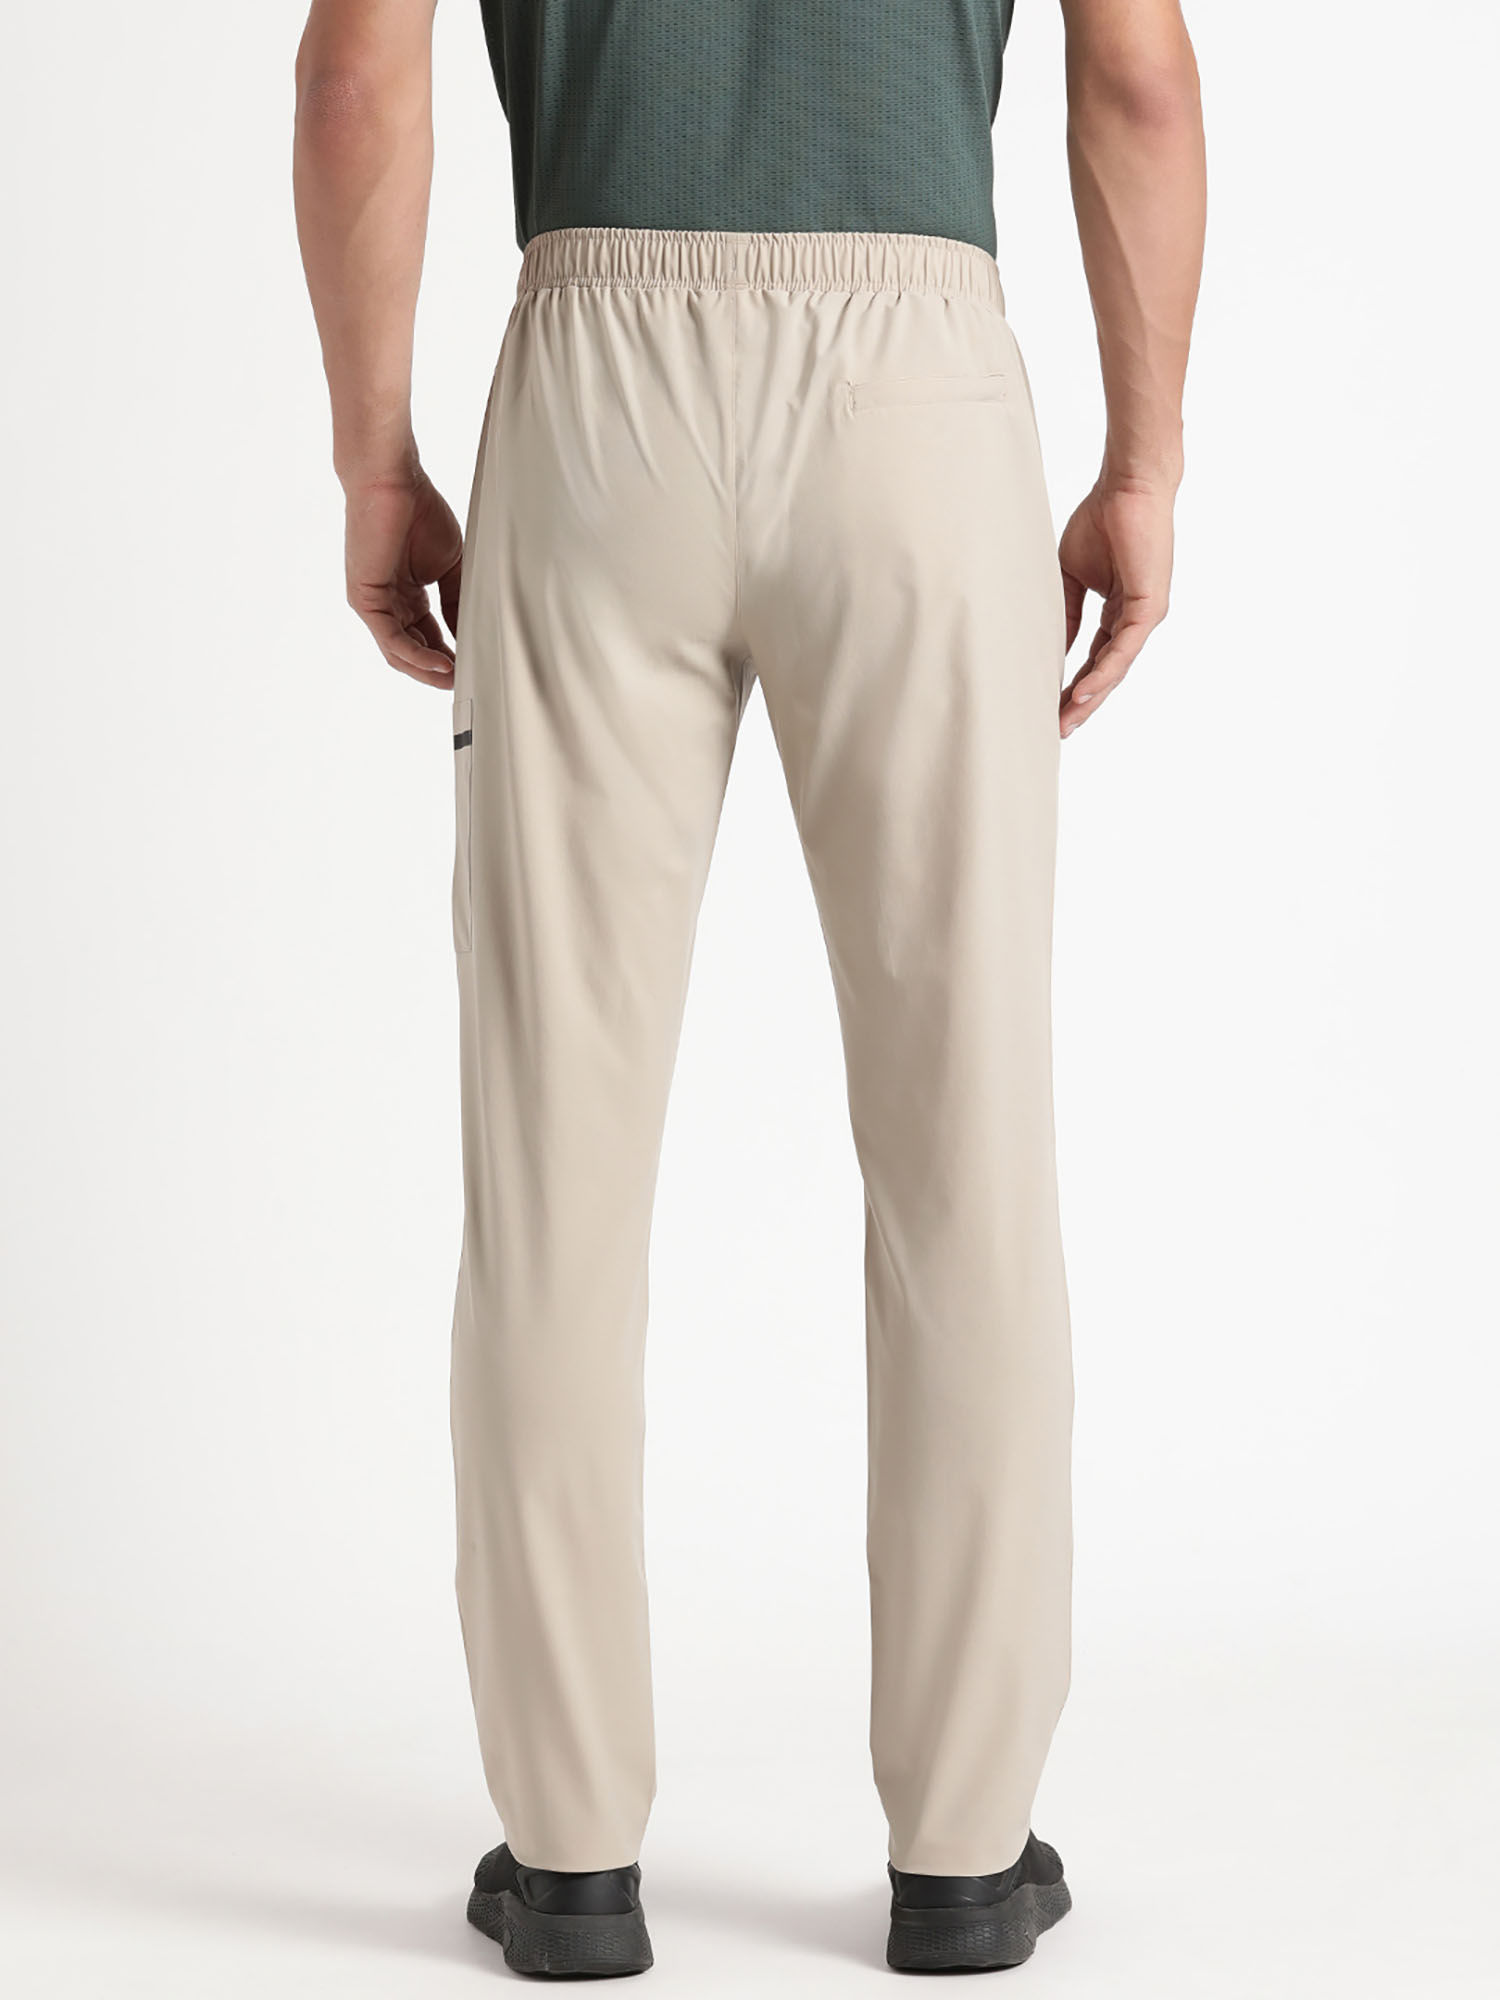 Wildcraft Joggers outlet  Men  1800 products on sale  FASHIOLAcouk